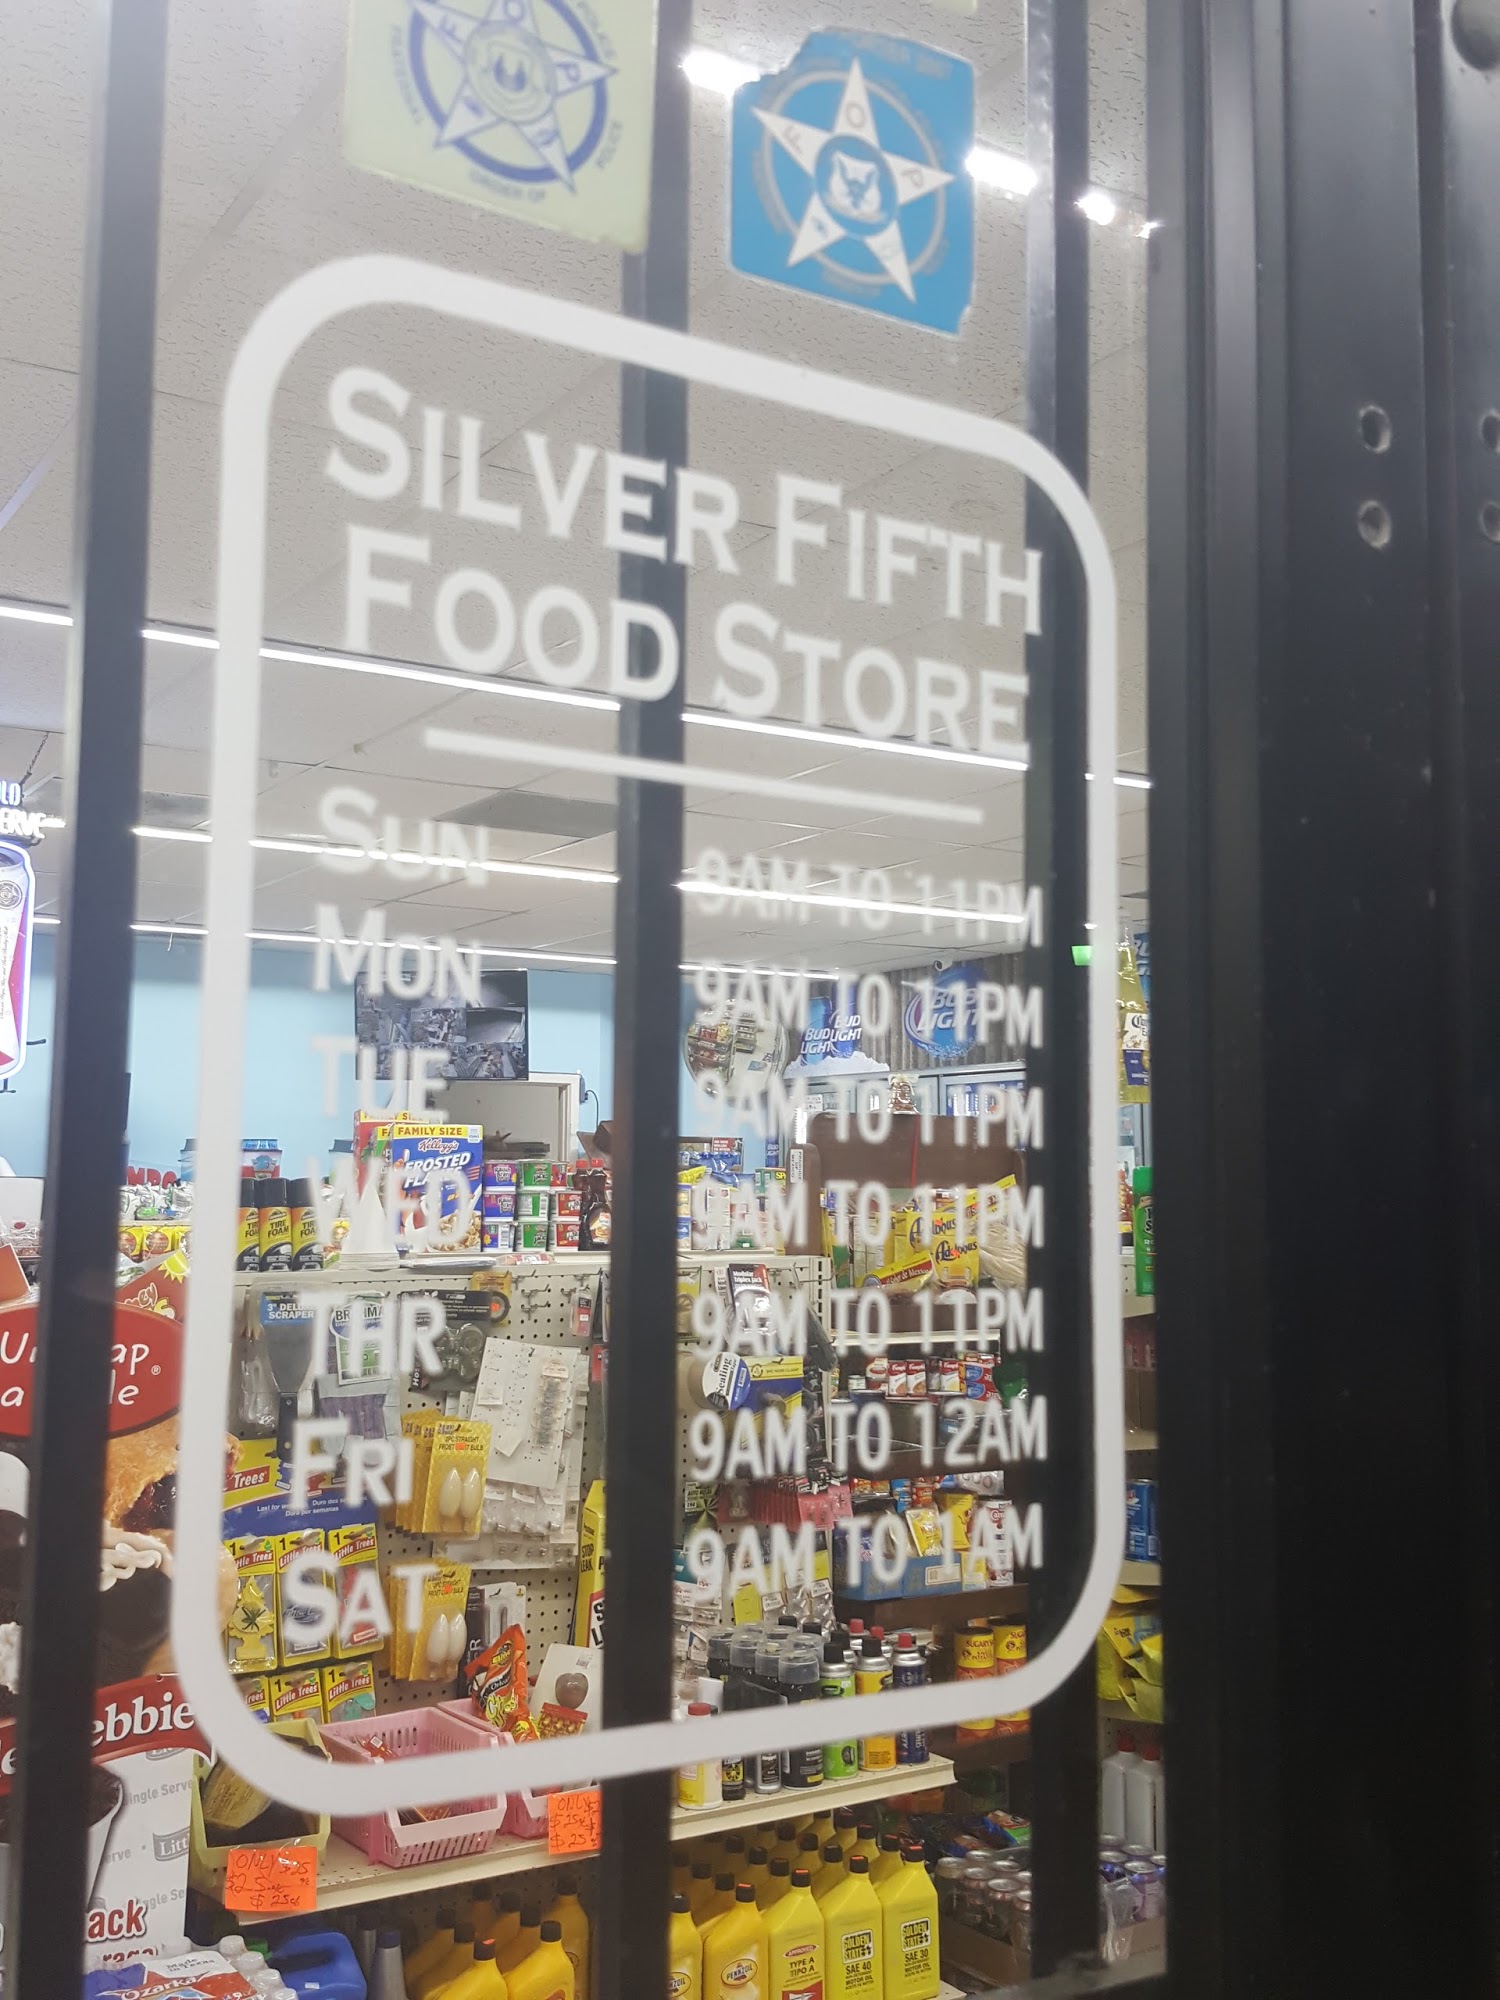 Silver Fifth Store